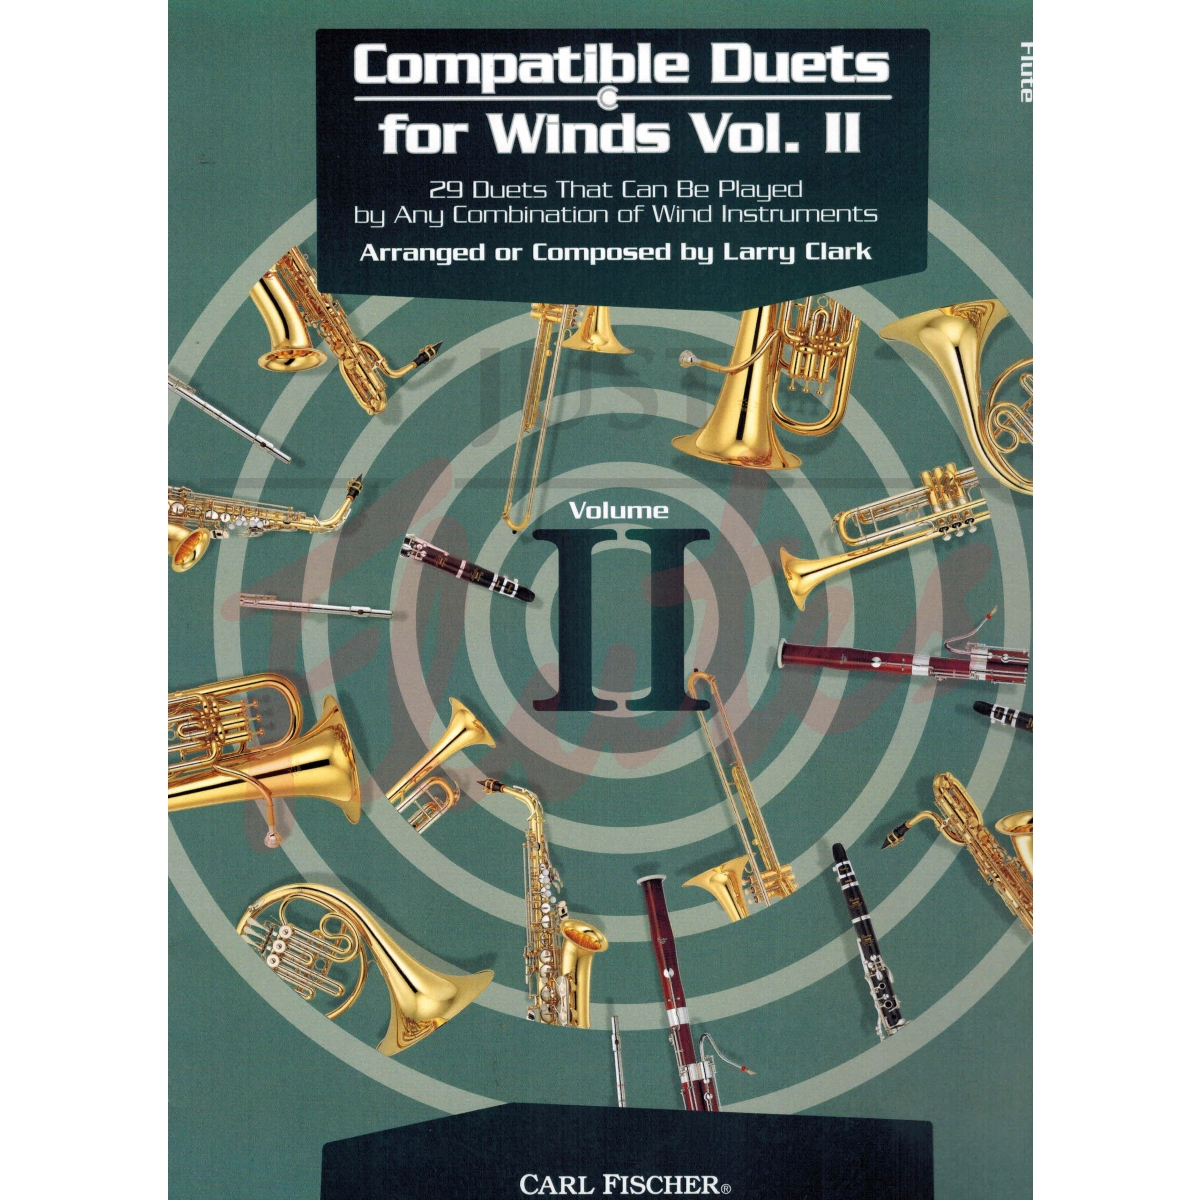 Compatible Duets for Winds Volume 2 [Flute]